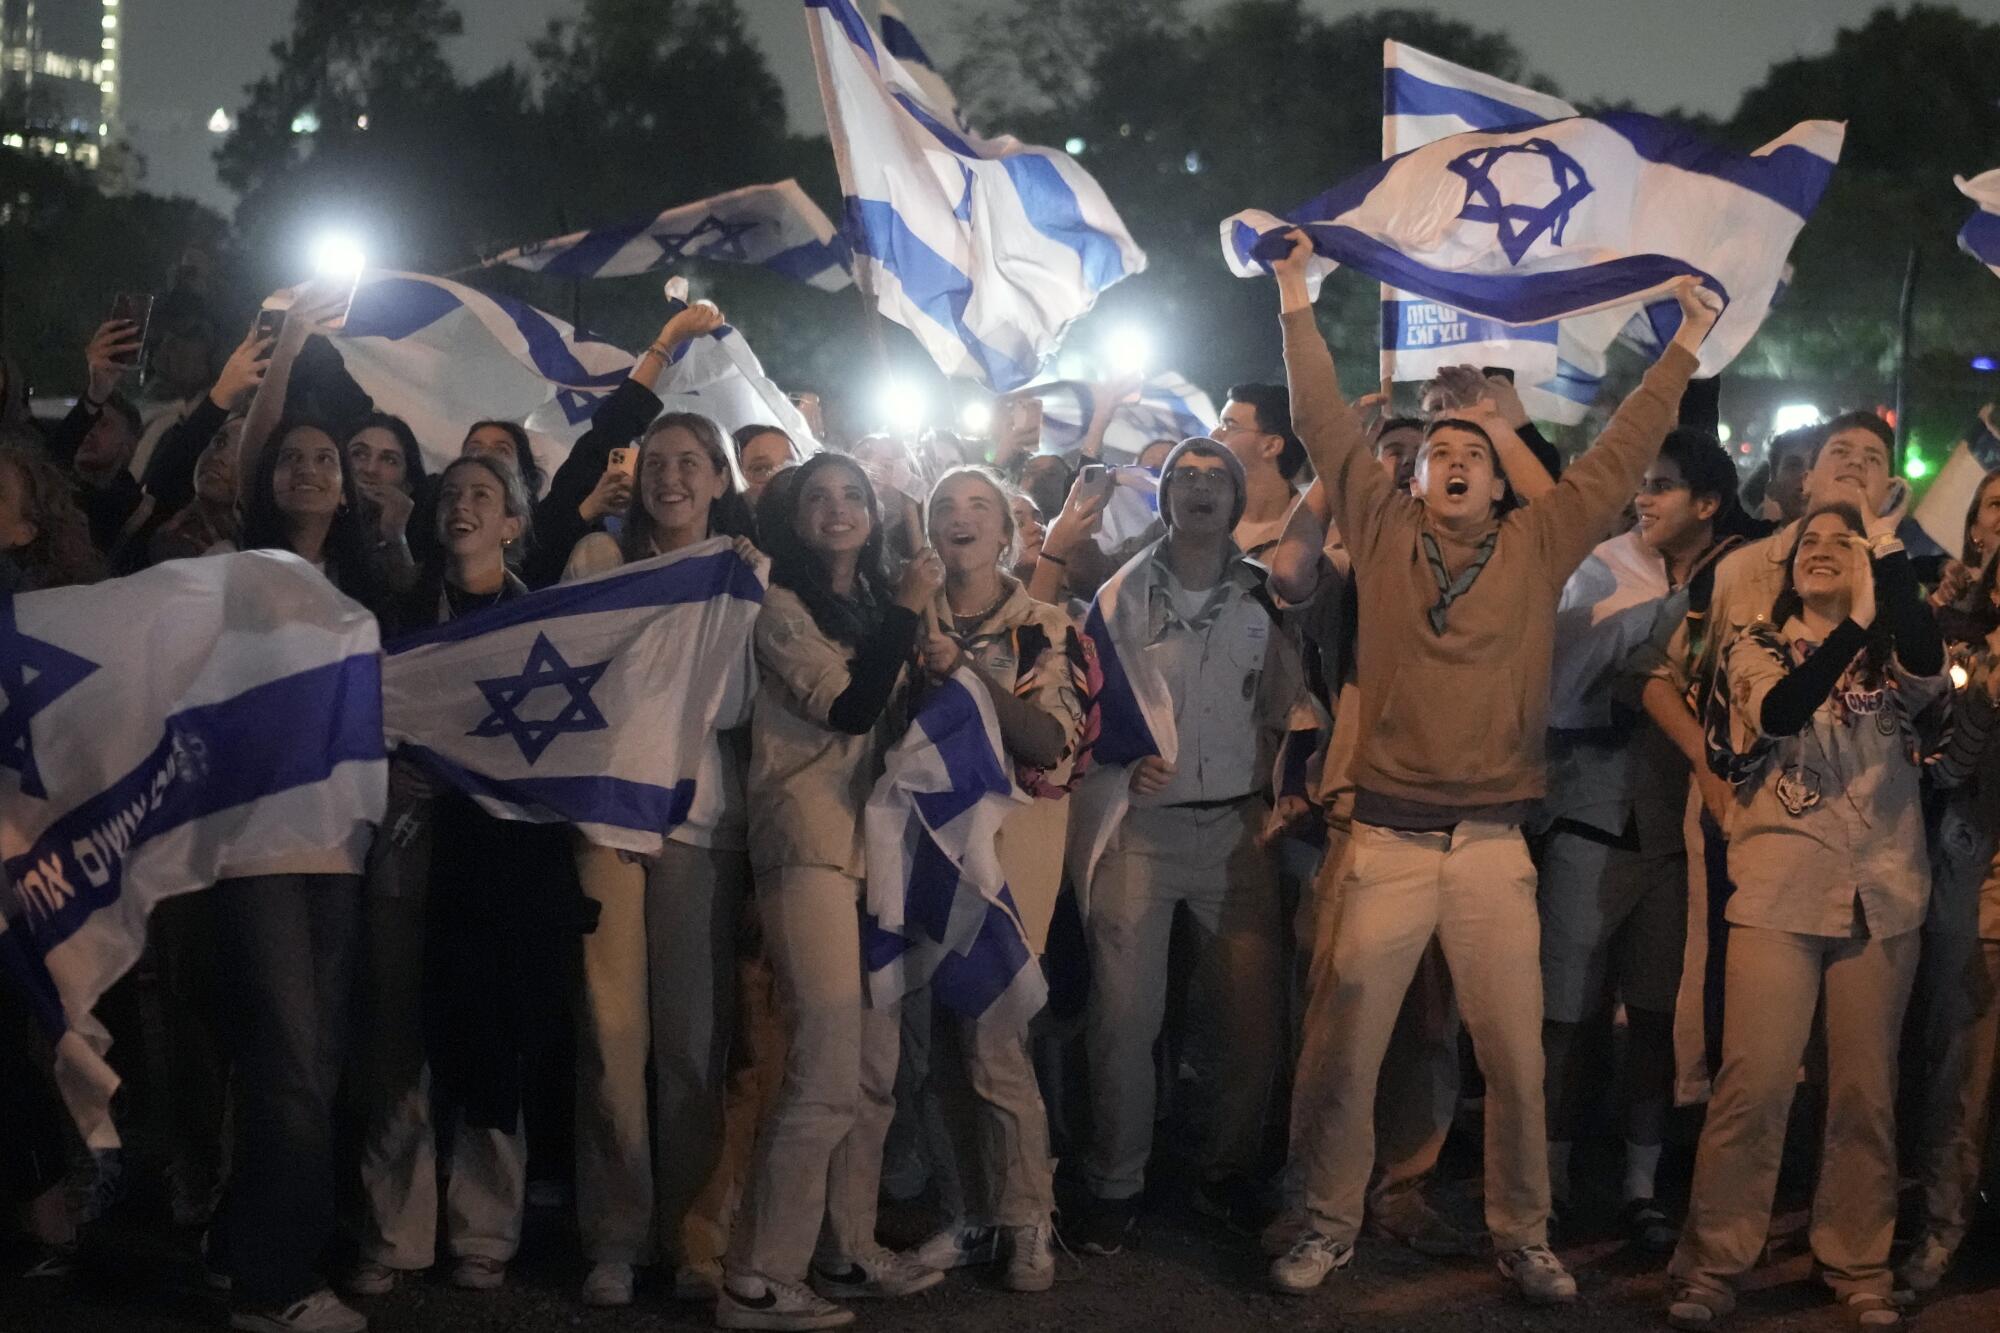 People celebrate and hold up Israeli flags.